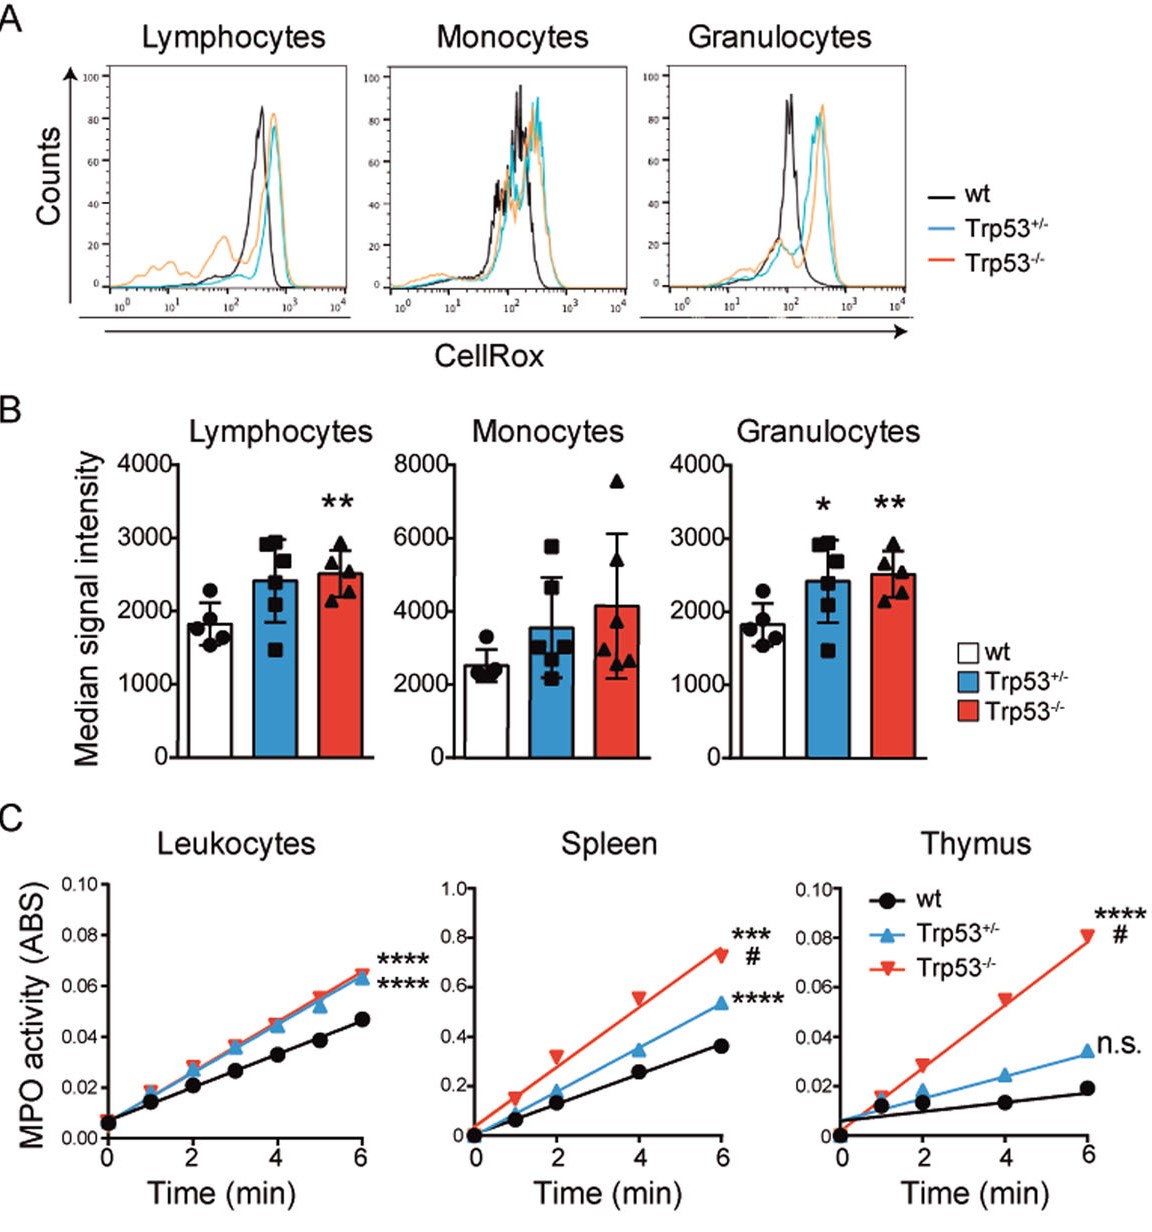 Single loss of a Trp53 allele triggers an increased oxidative, DNA damage and cytokine inflammatory responses through deregulation of IκBα expression